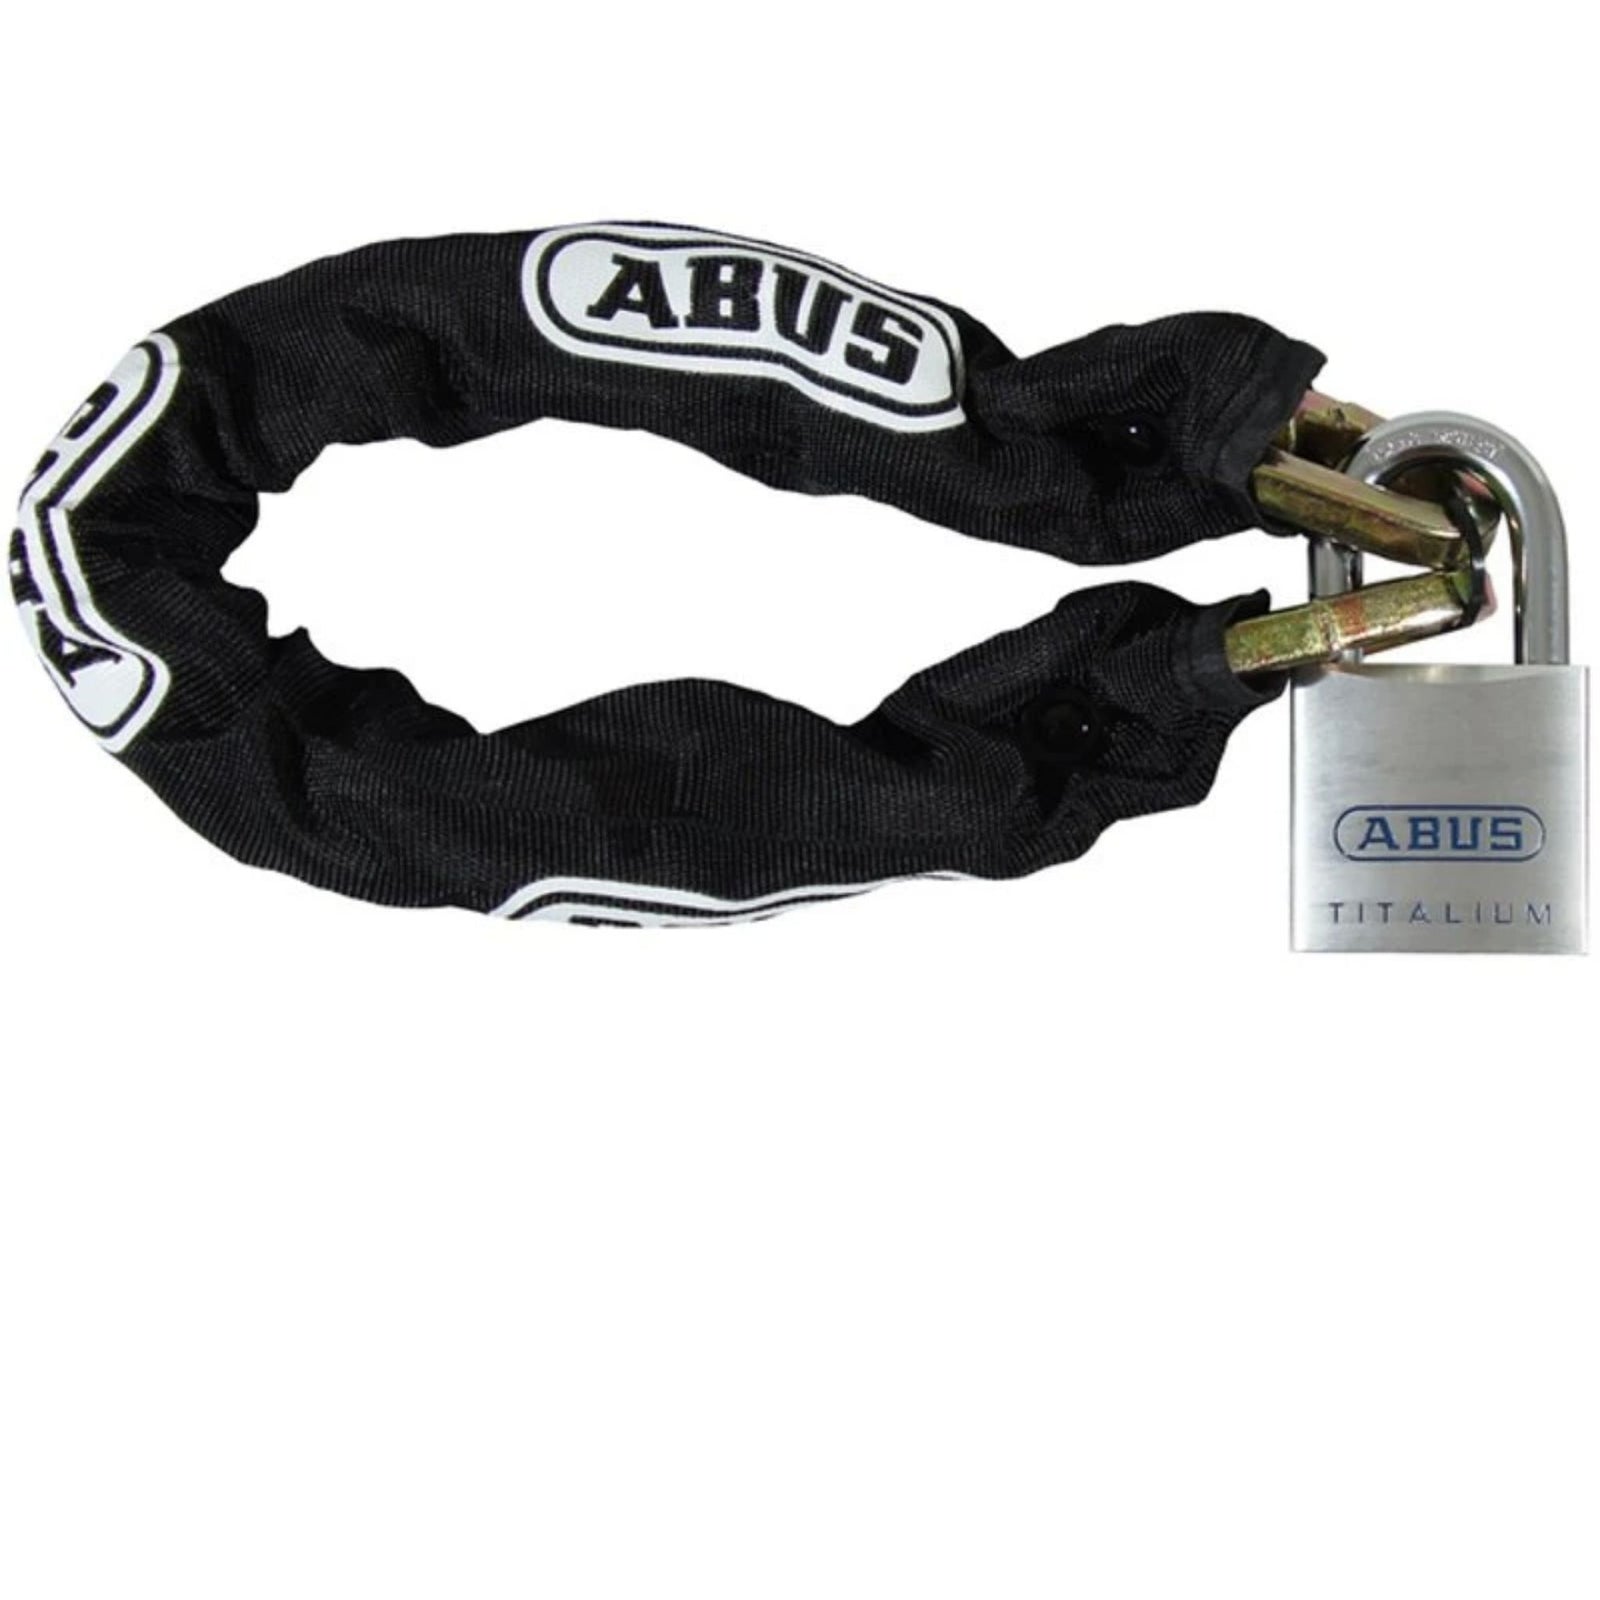 Cables, Cable Locks & Padlocks, Pre-Cut Chains and Custom Size Pre